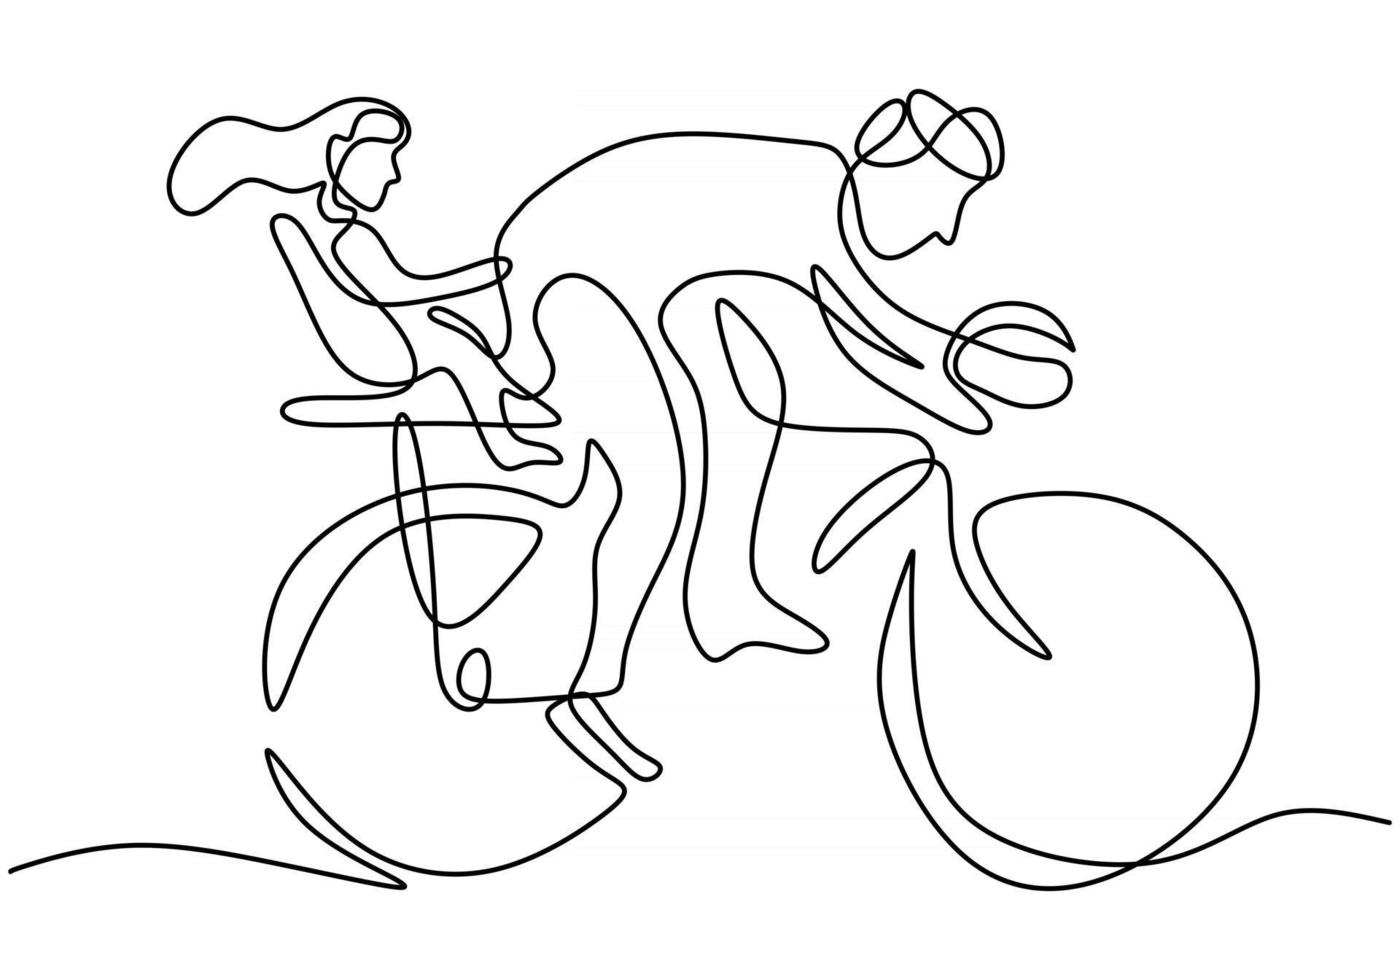 Continuous single line drawing young father and his daughter riding bicycle at public park hand drawn line art minimalist design vector